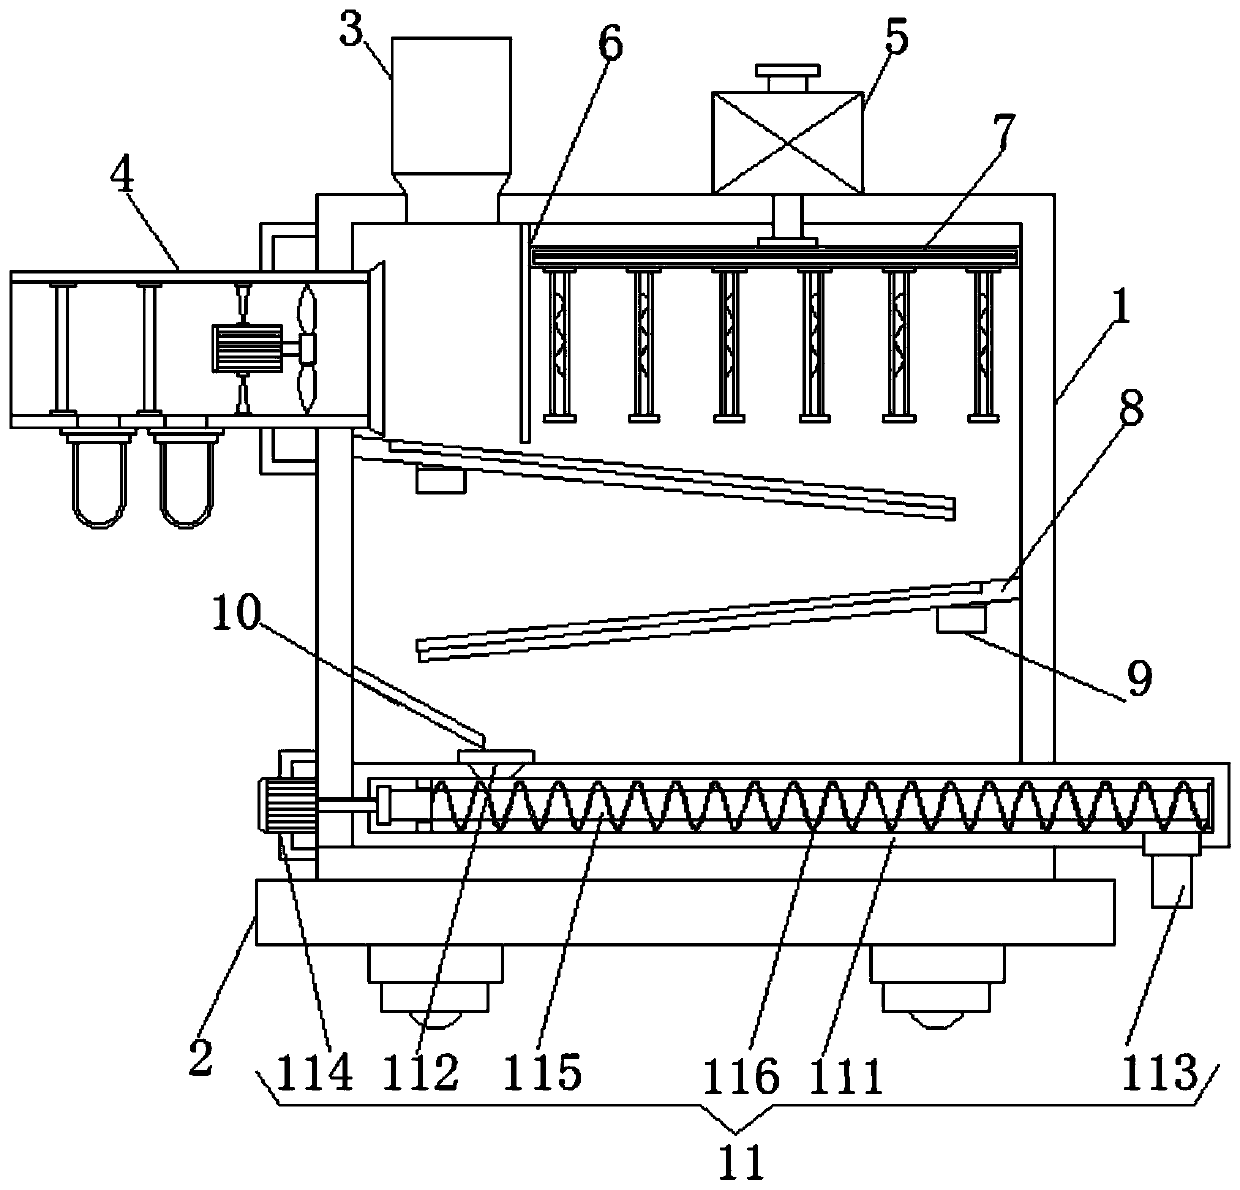 An impurity removal and drying device for agricultural grain